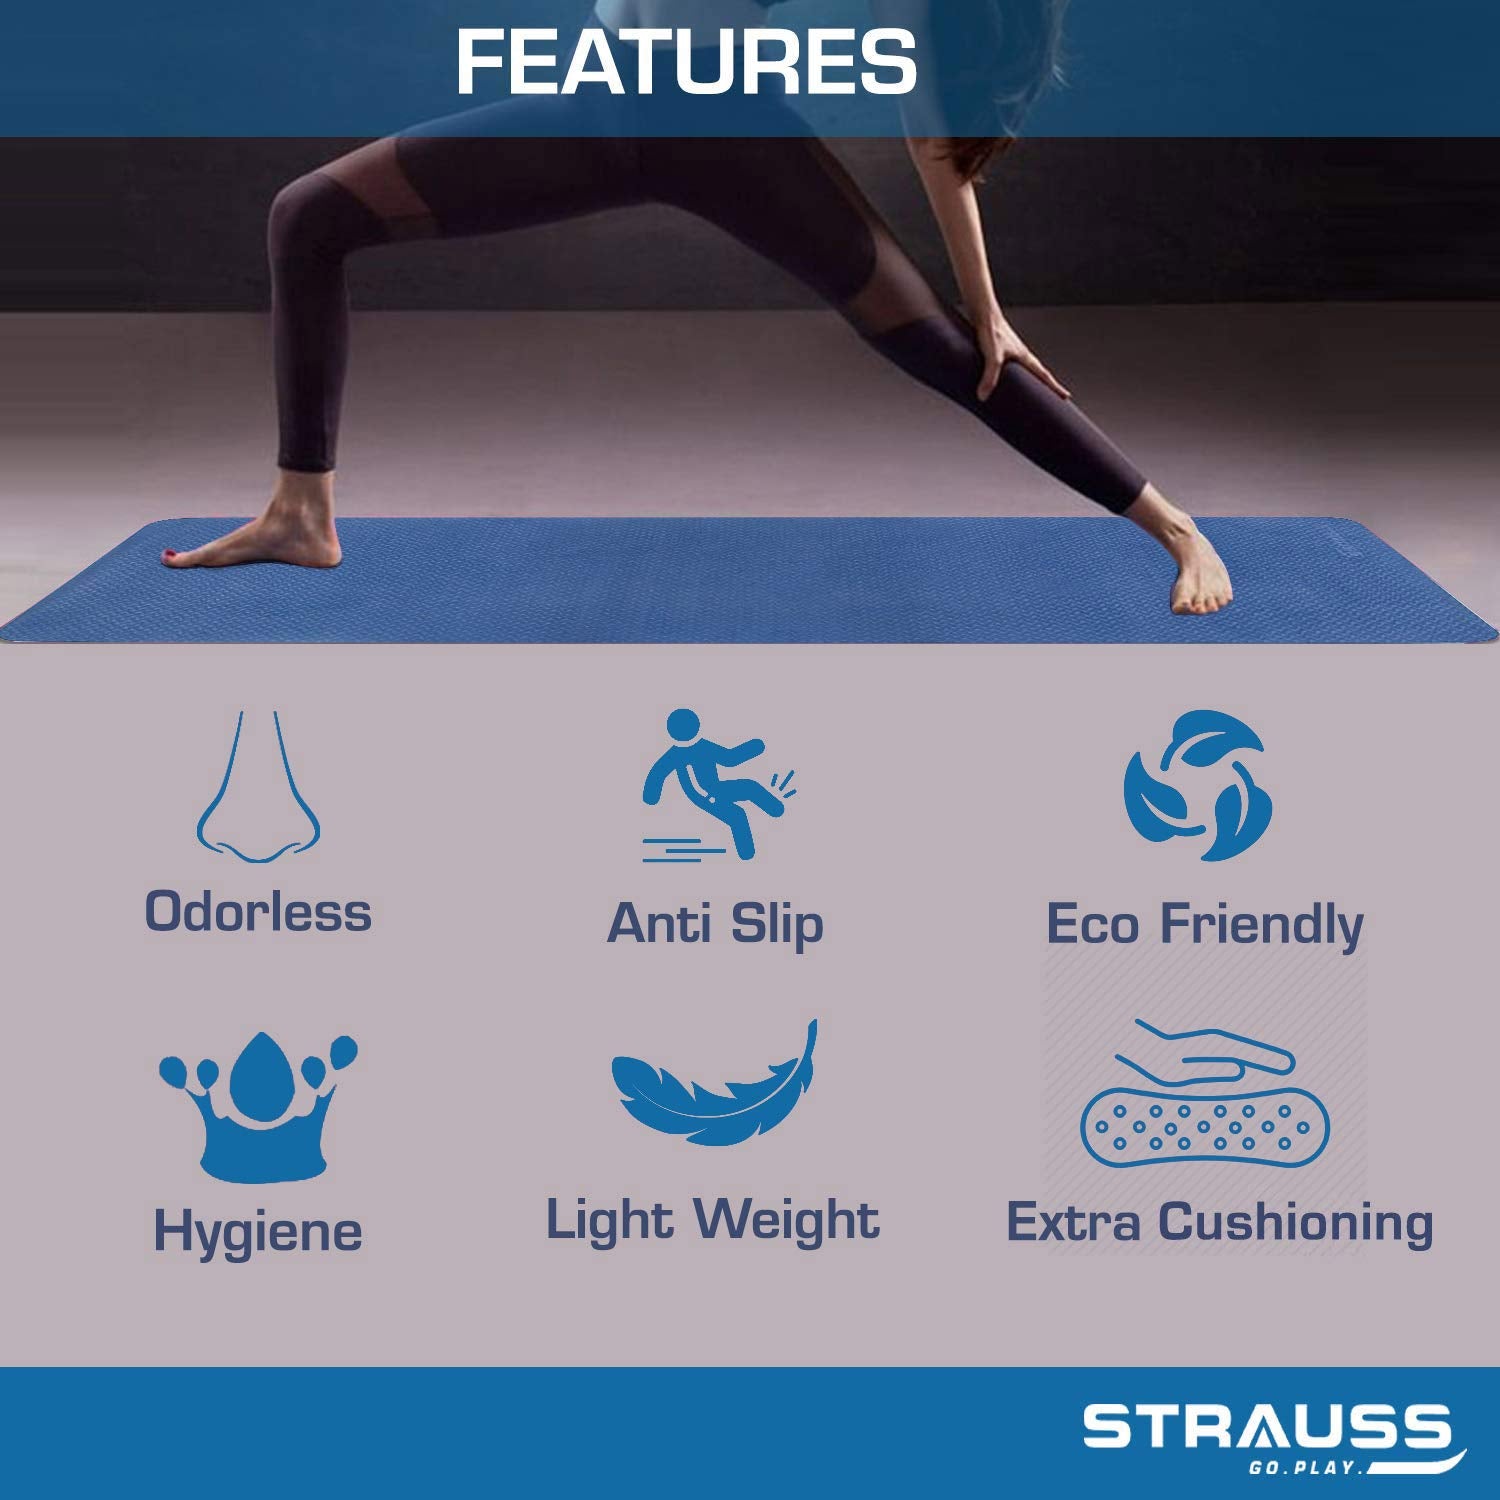 Strauss TPE Eco Friendly Dual Layer Yoga Mat, 6mm (Blue) and Cooling Towel, 80 cm, (Blue)